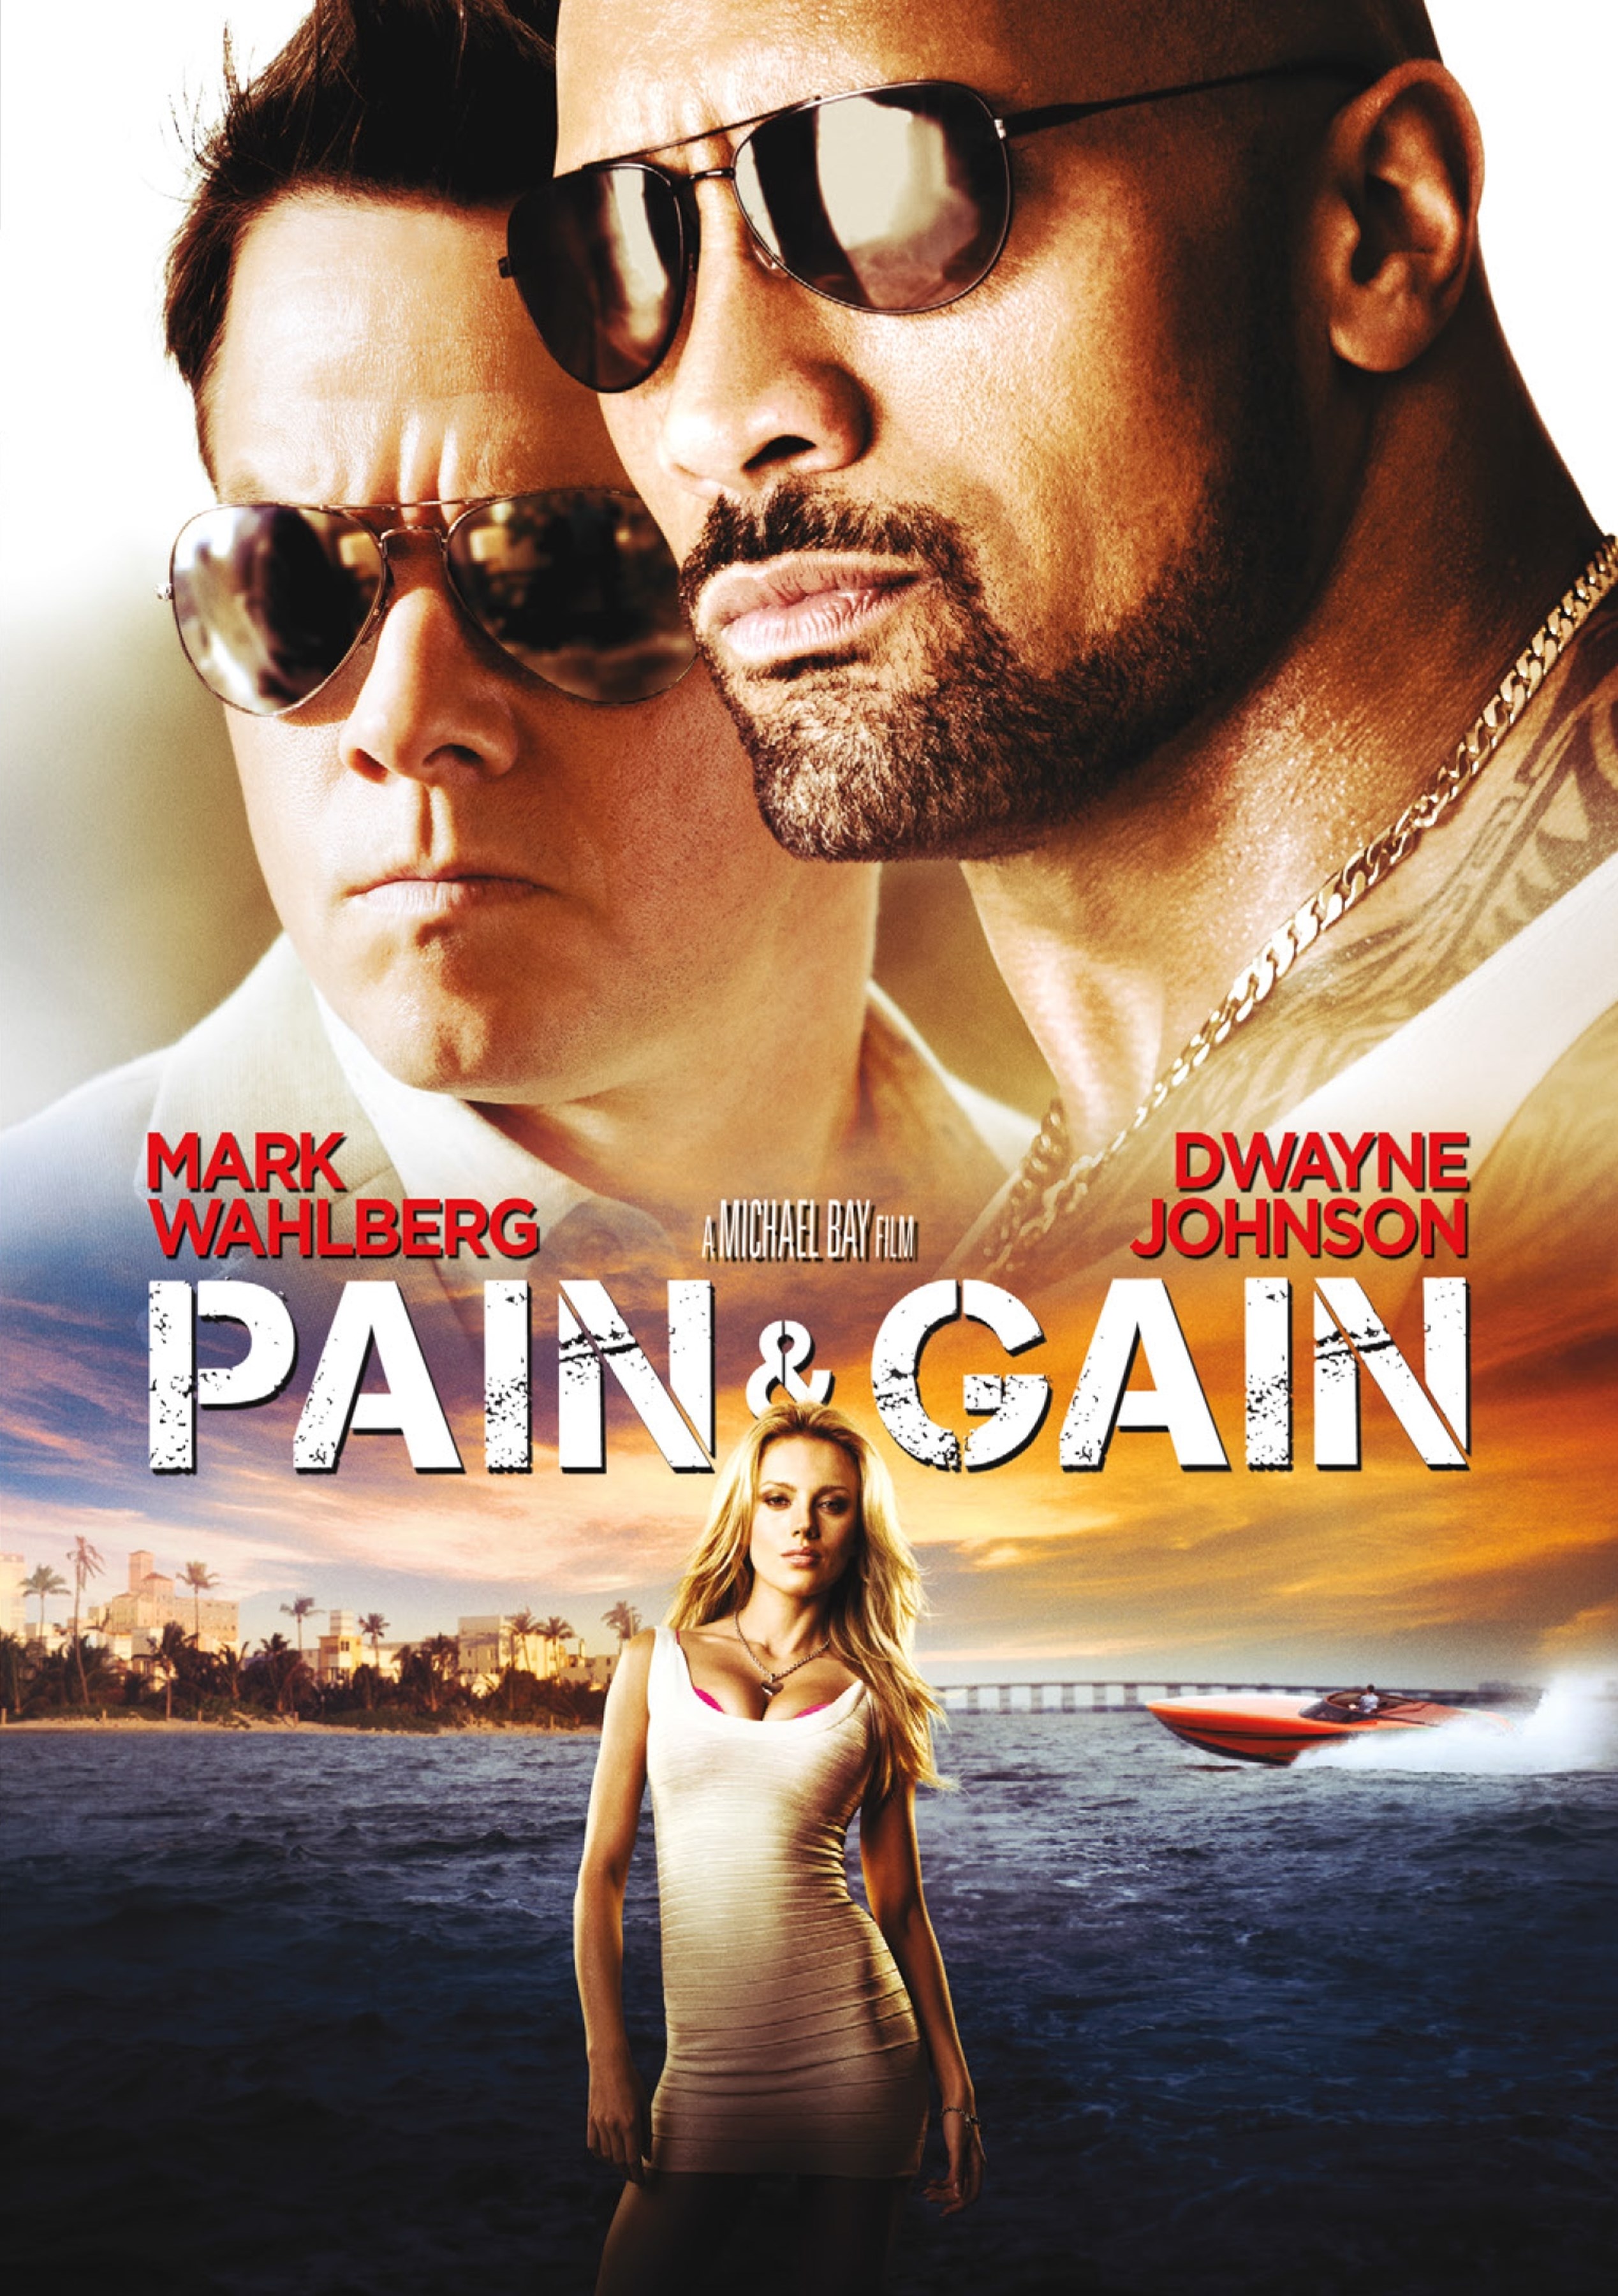 Gain in pain and nikki benz Movie Review: